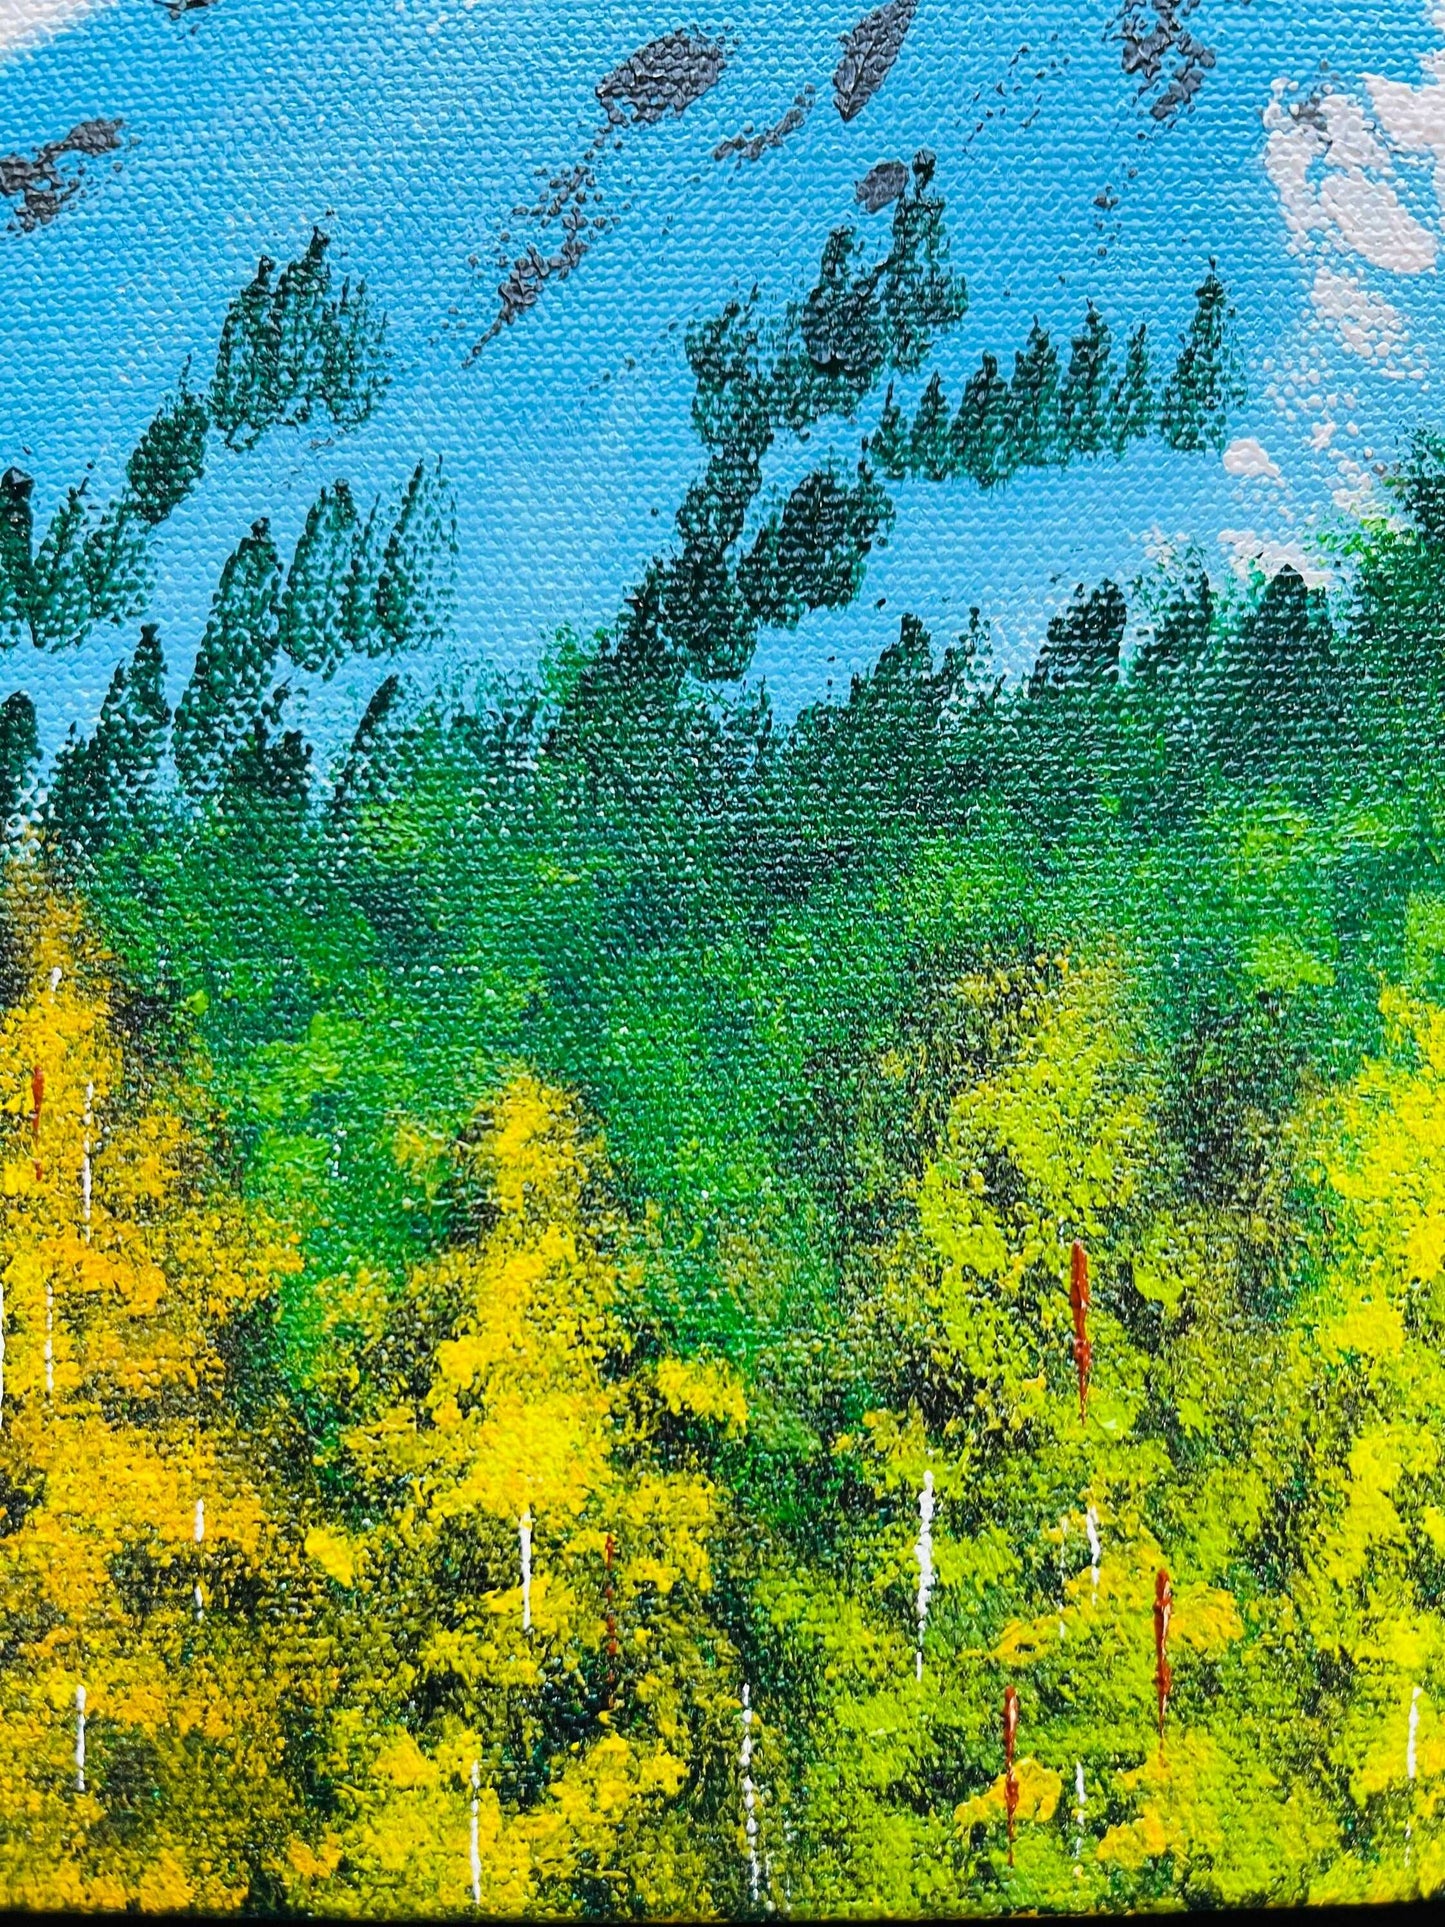 Snowy mountain painting  with Trees- ready to ship. Colorado mountain painting, Landscape Colorado art by Nisha Ghela